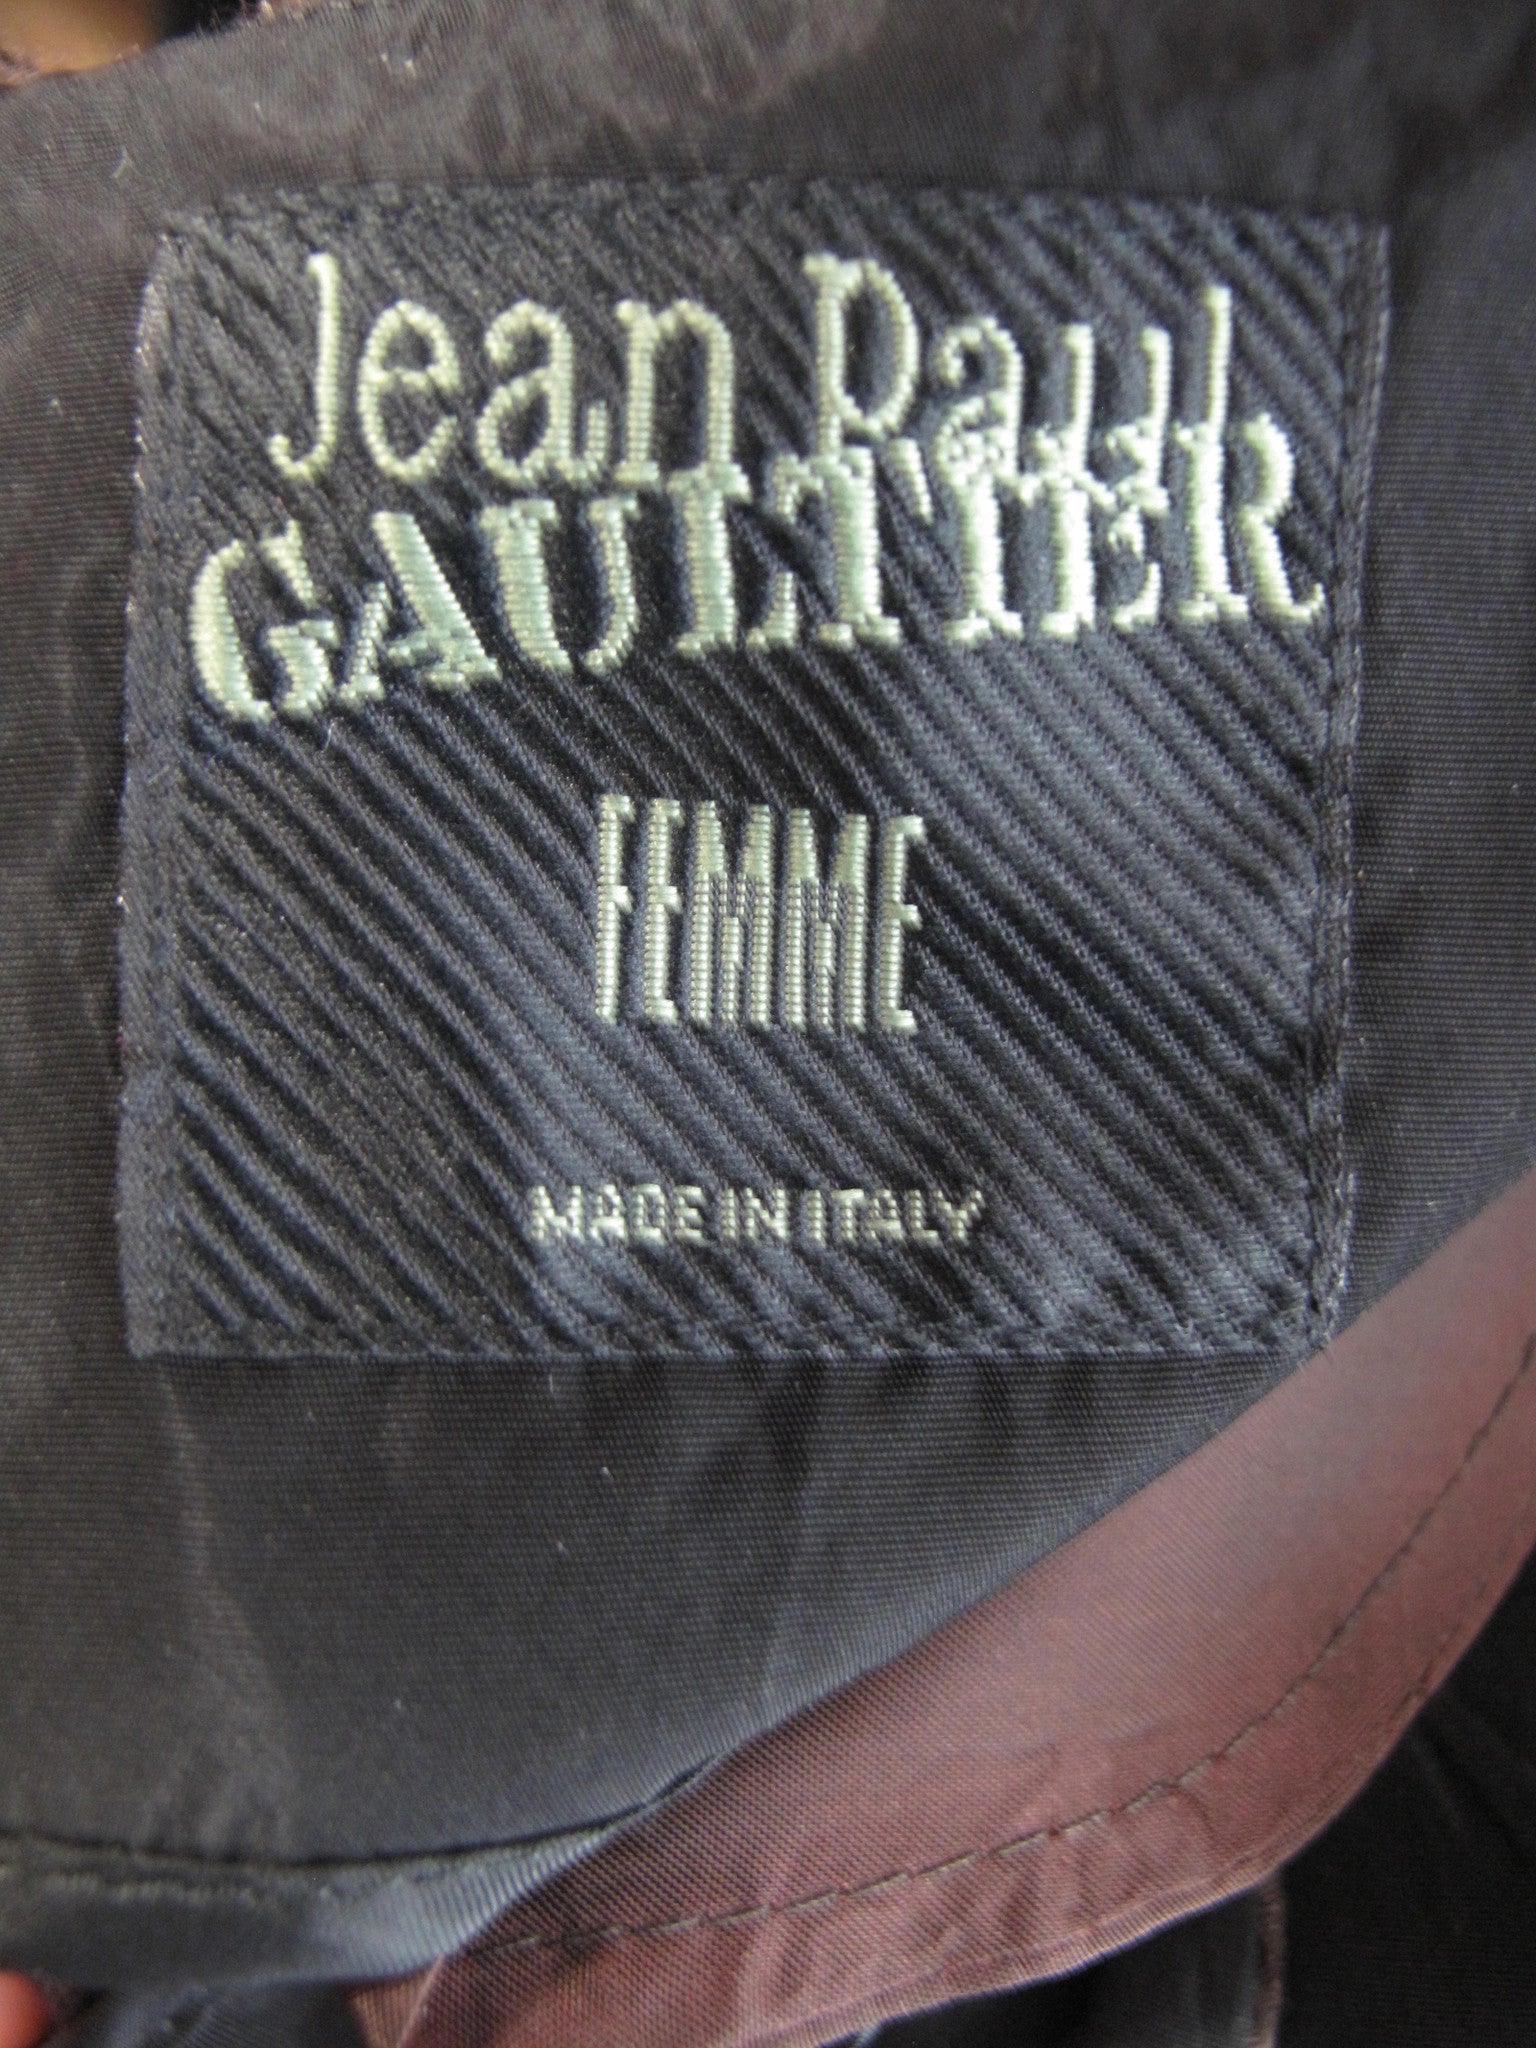 JEAN PAUL GAULTIER Vintage from ARCHIVE VINTAGE, online store